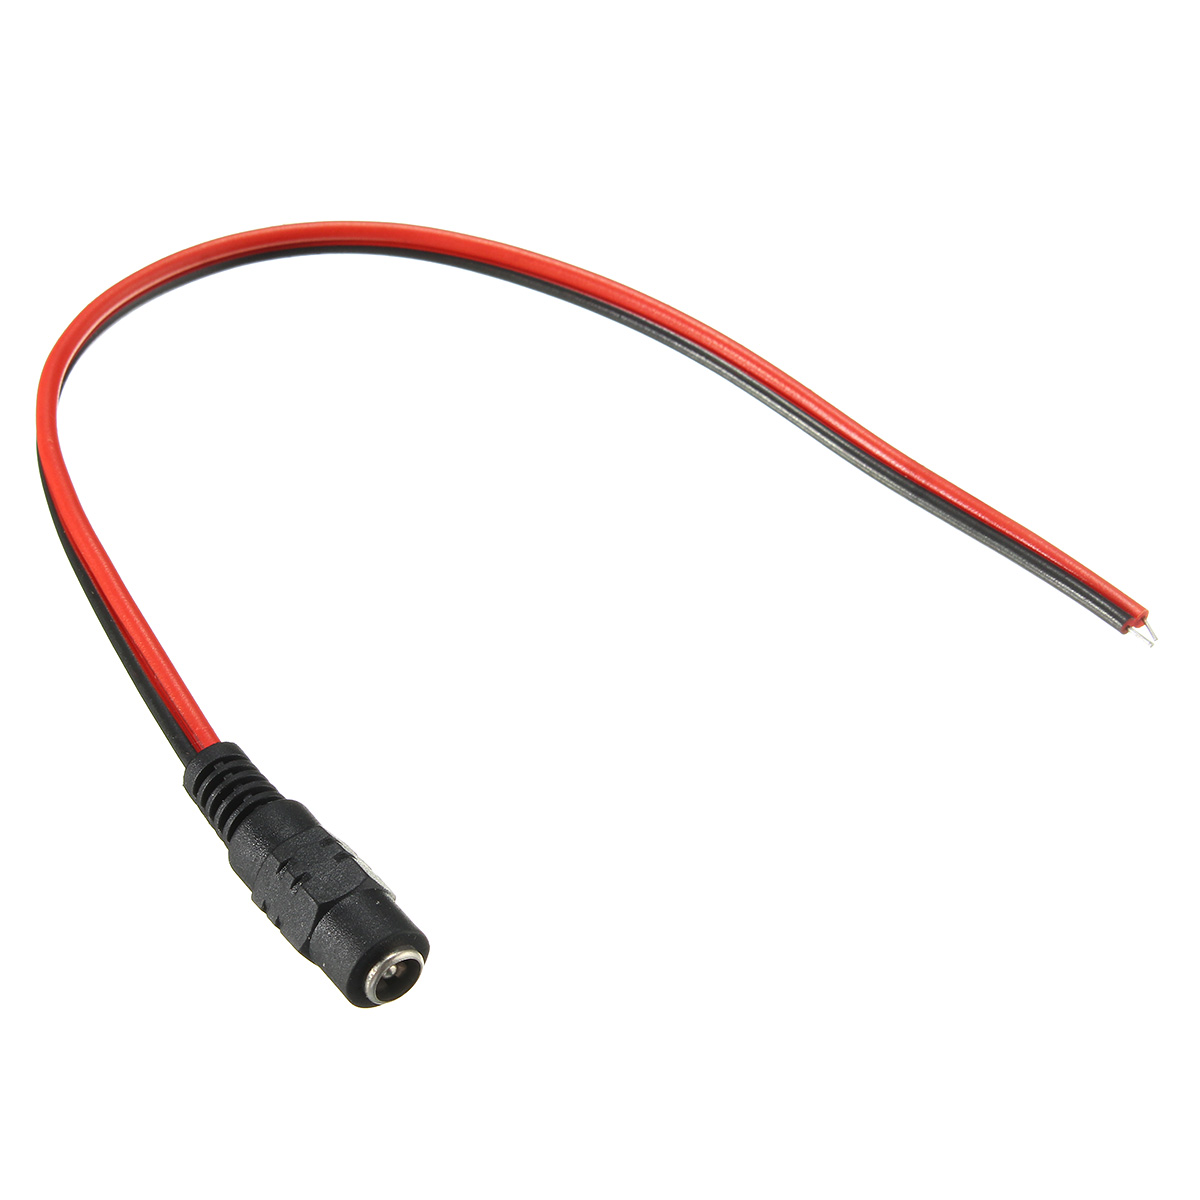 10PCS-LUSTREON-DC12V-Female-Power-Supply-Jack-Connector-Cable-Plug-Cord-Wire-55mm-x-21mm-1369157